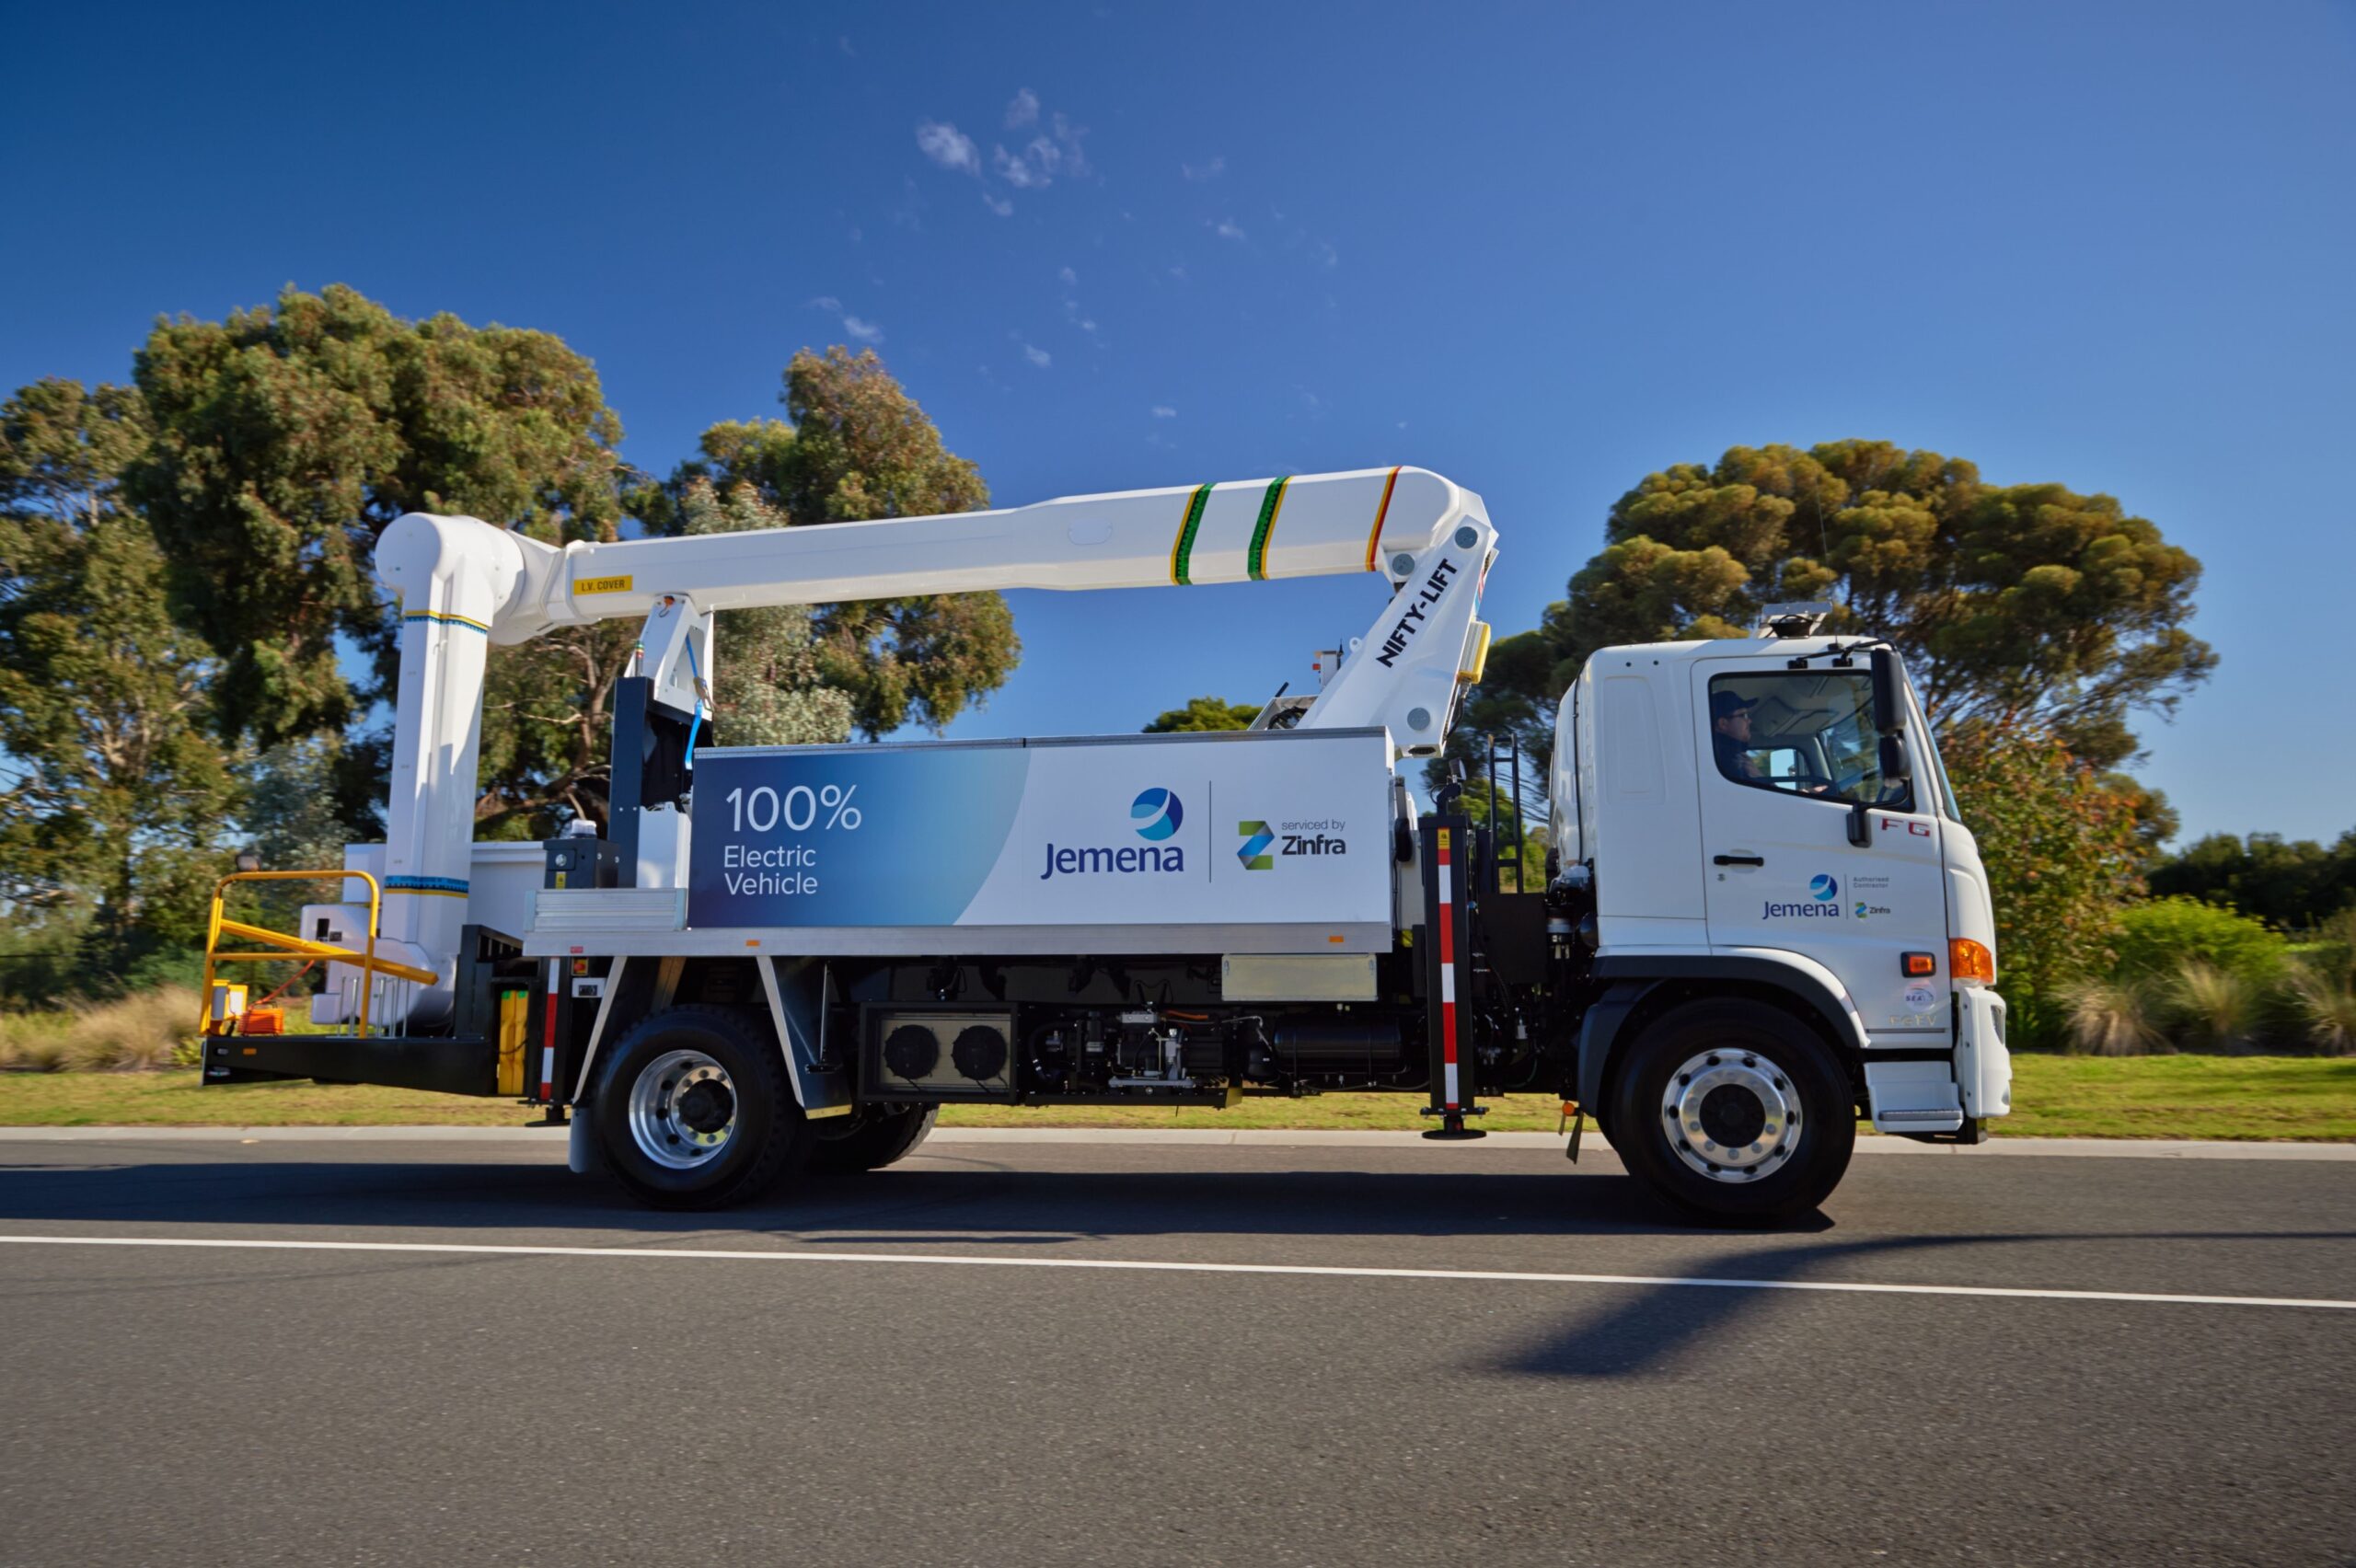 Jemena reduces carbon emissions with Australian-first electric powered cherry picker truck